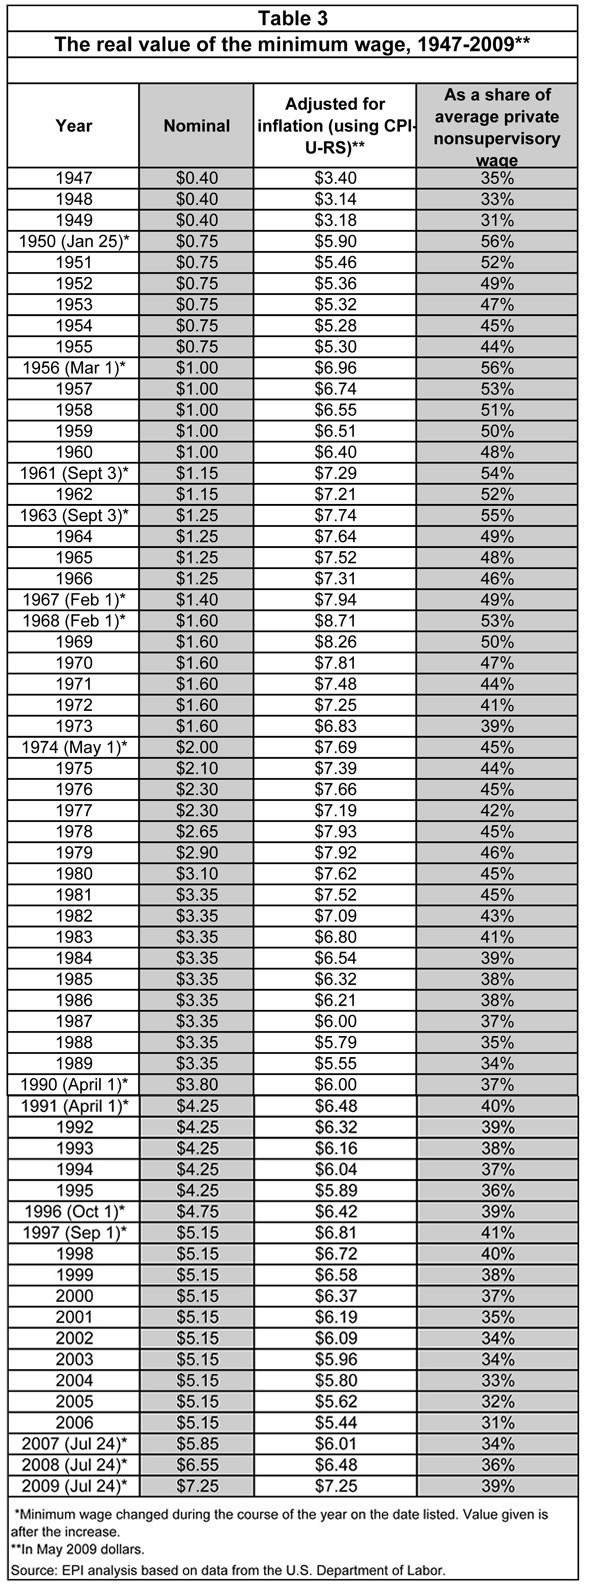 Table 3: The real value of the minimum wage, 1947-2009